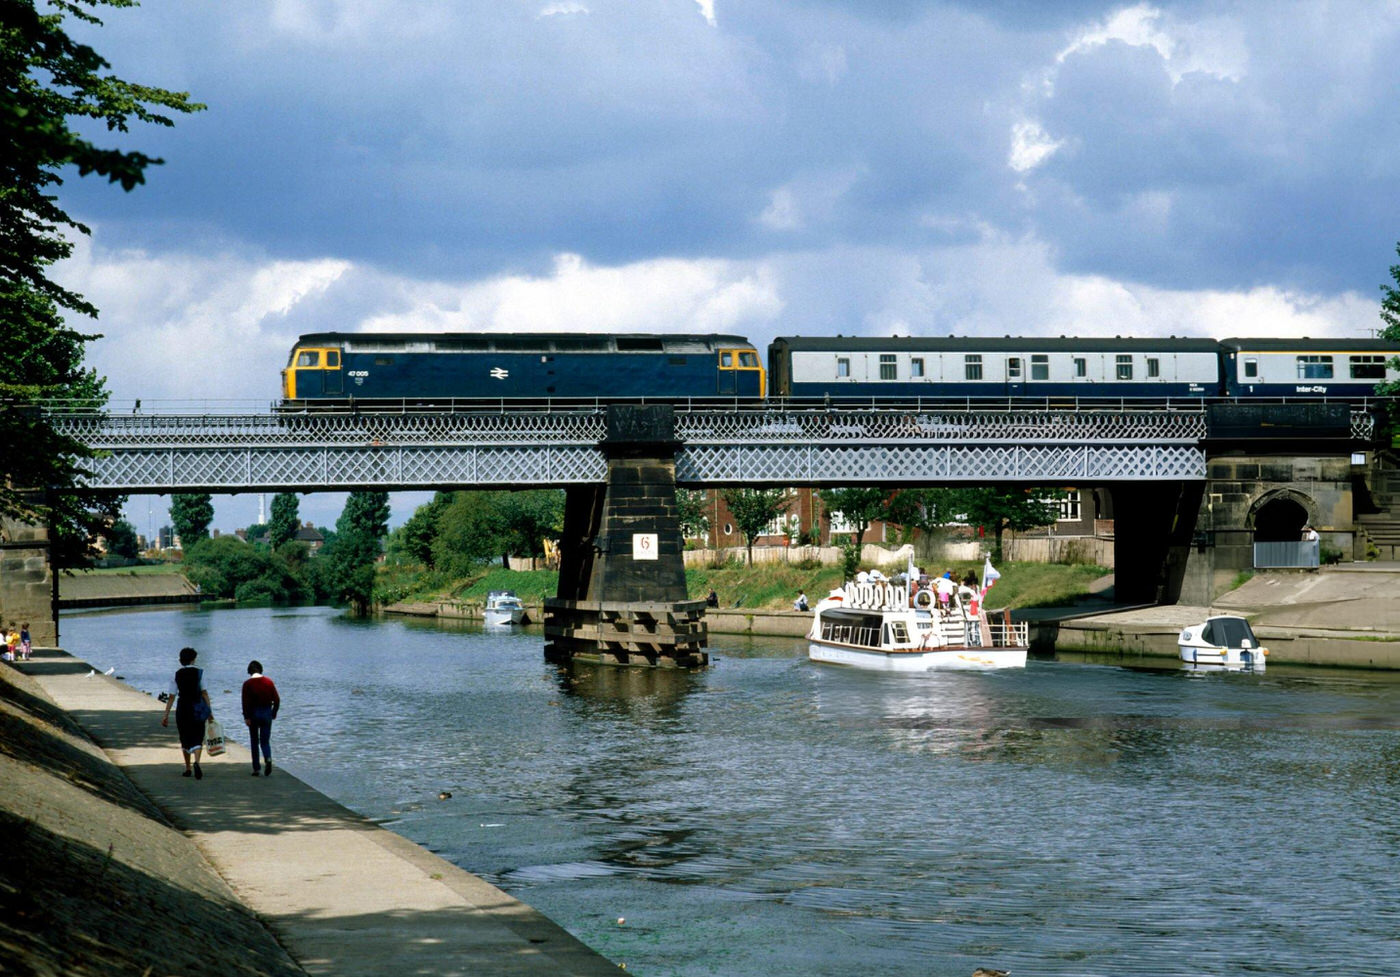 No.47.005 arrives in York over the river Ouse, 1980s.